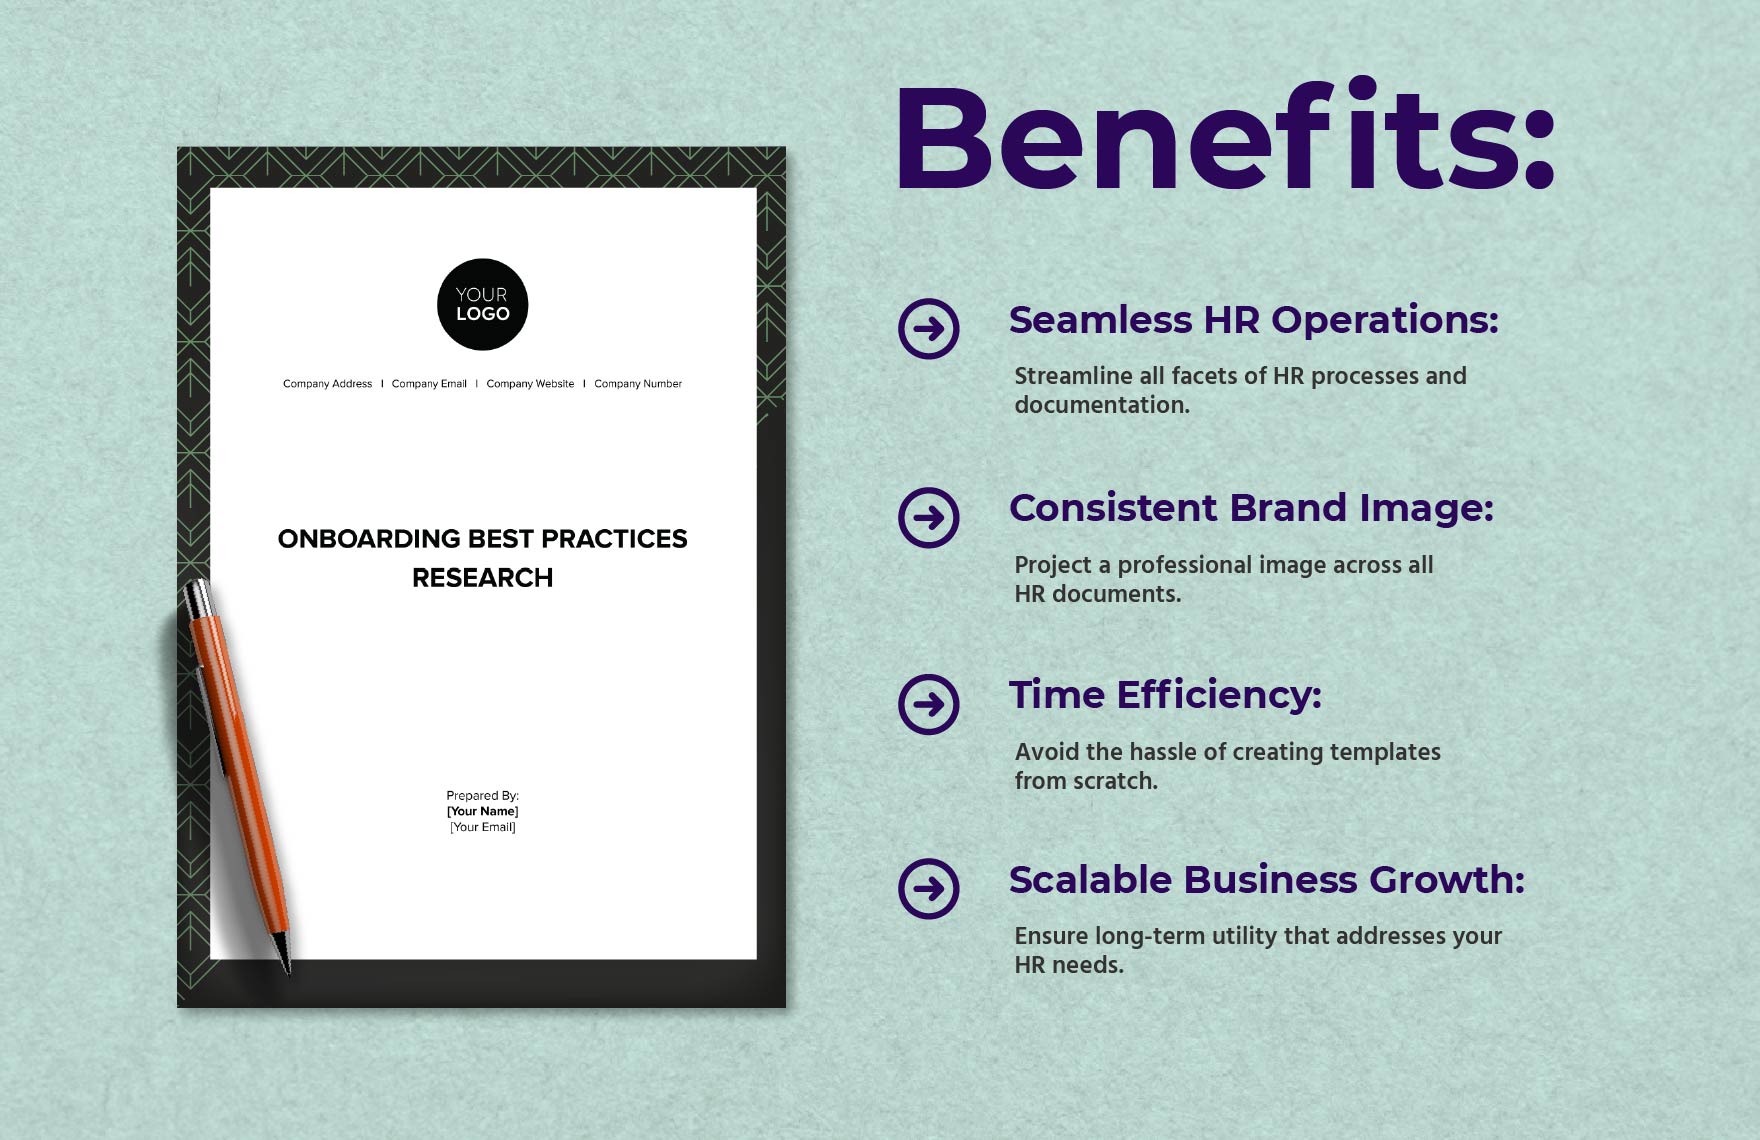 Onboarding Best Practices Research HR Template